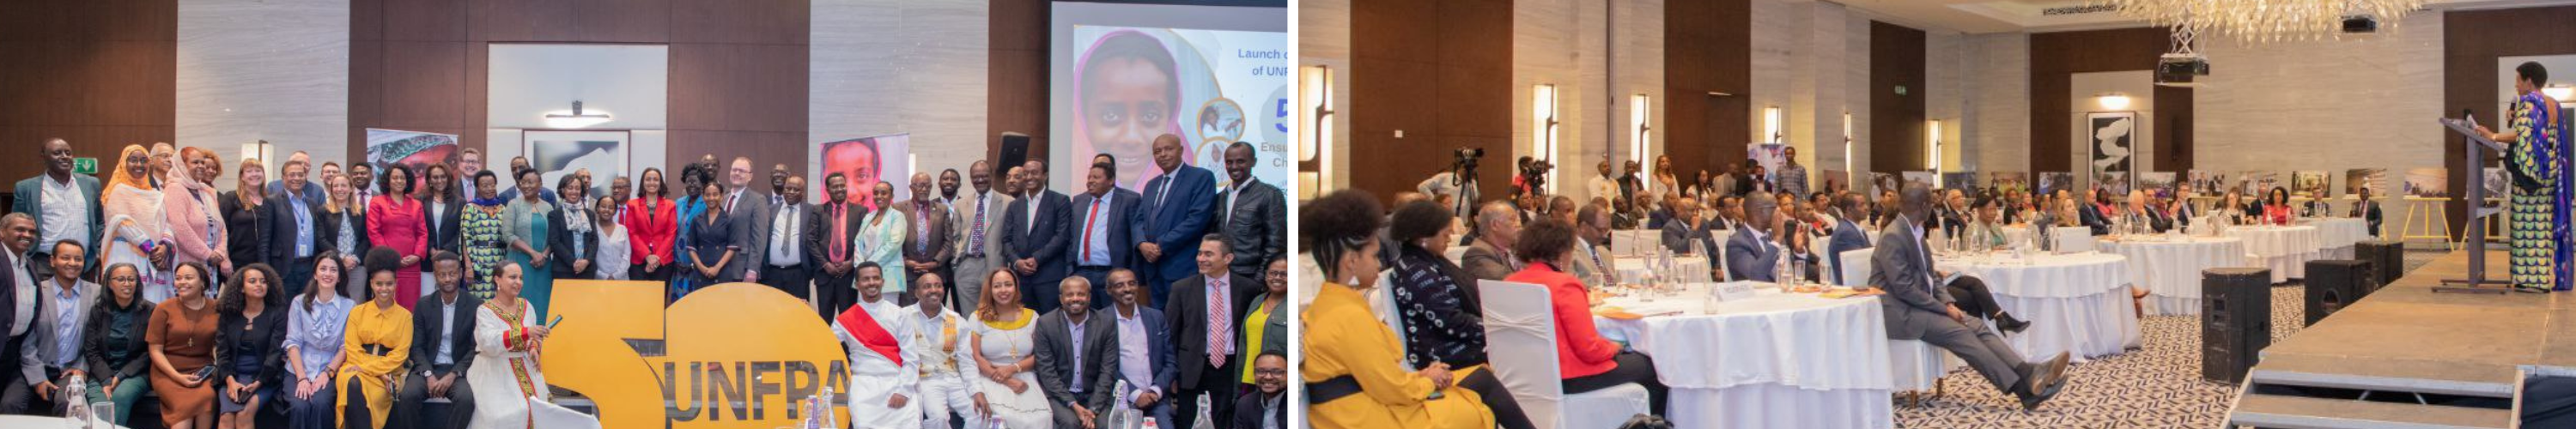 Participants in the launching ceremony of the 50th-anniversary commemoration of UNFPA Ethiopia 